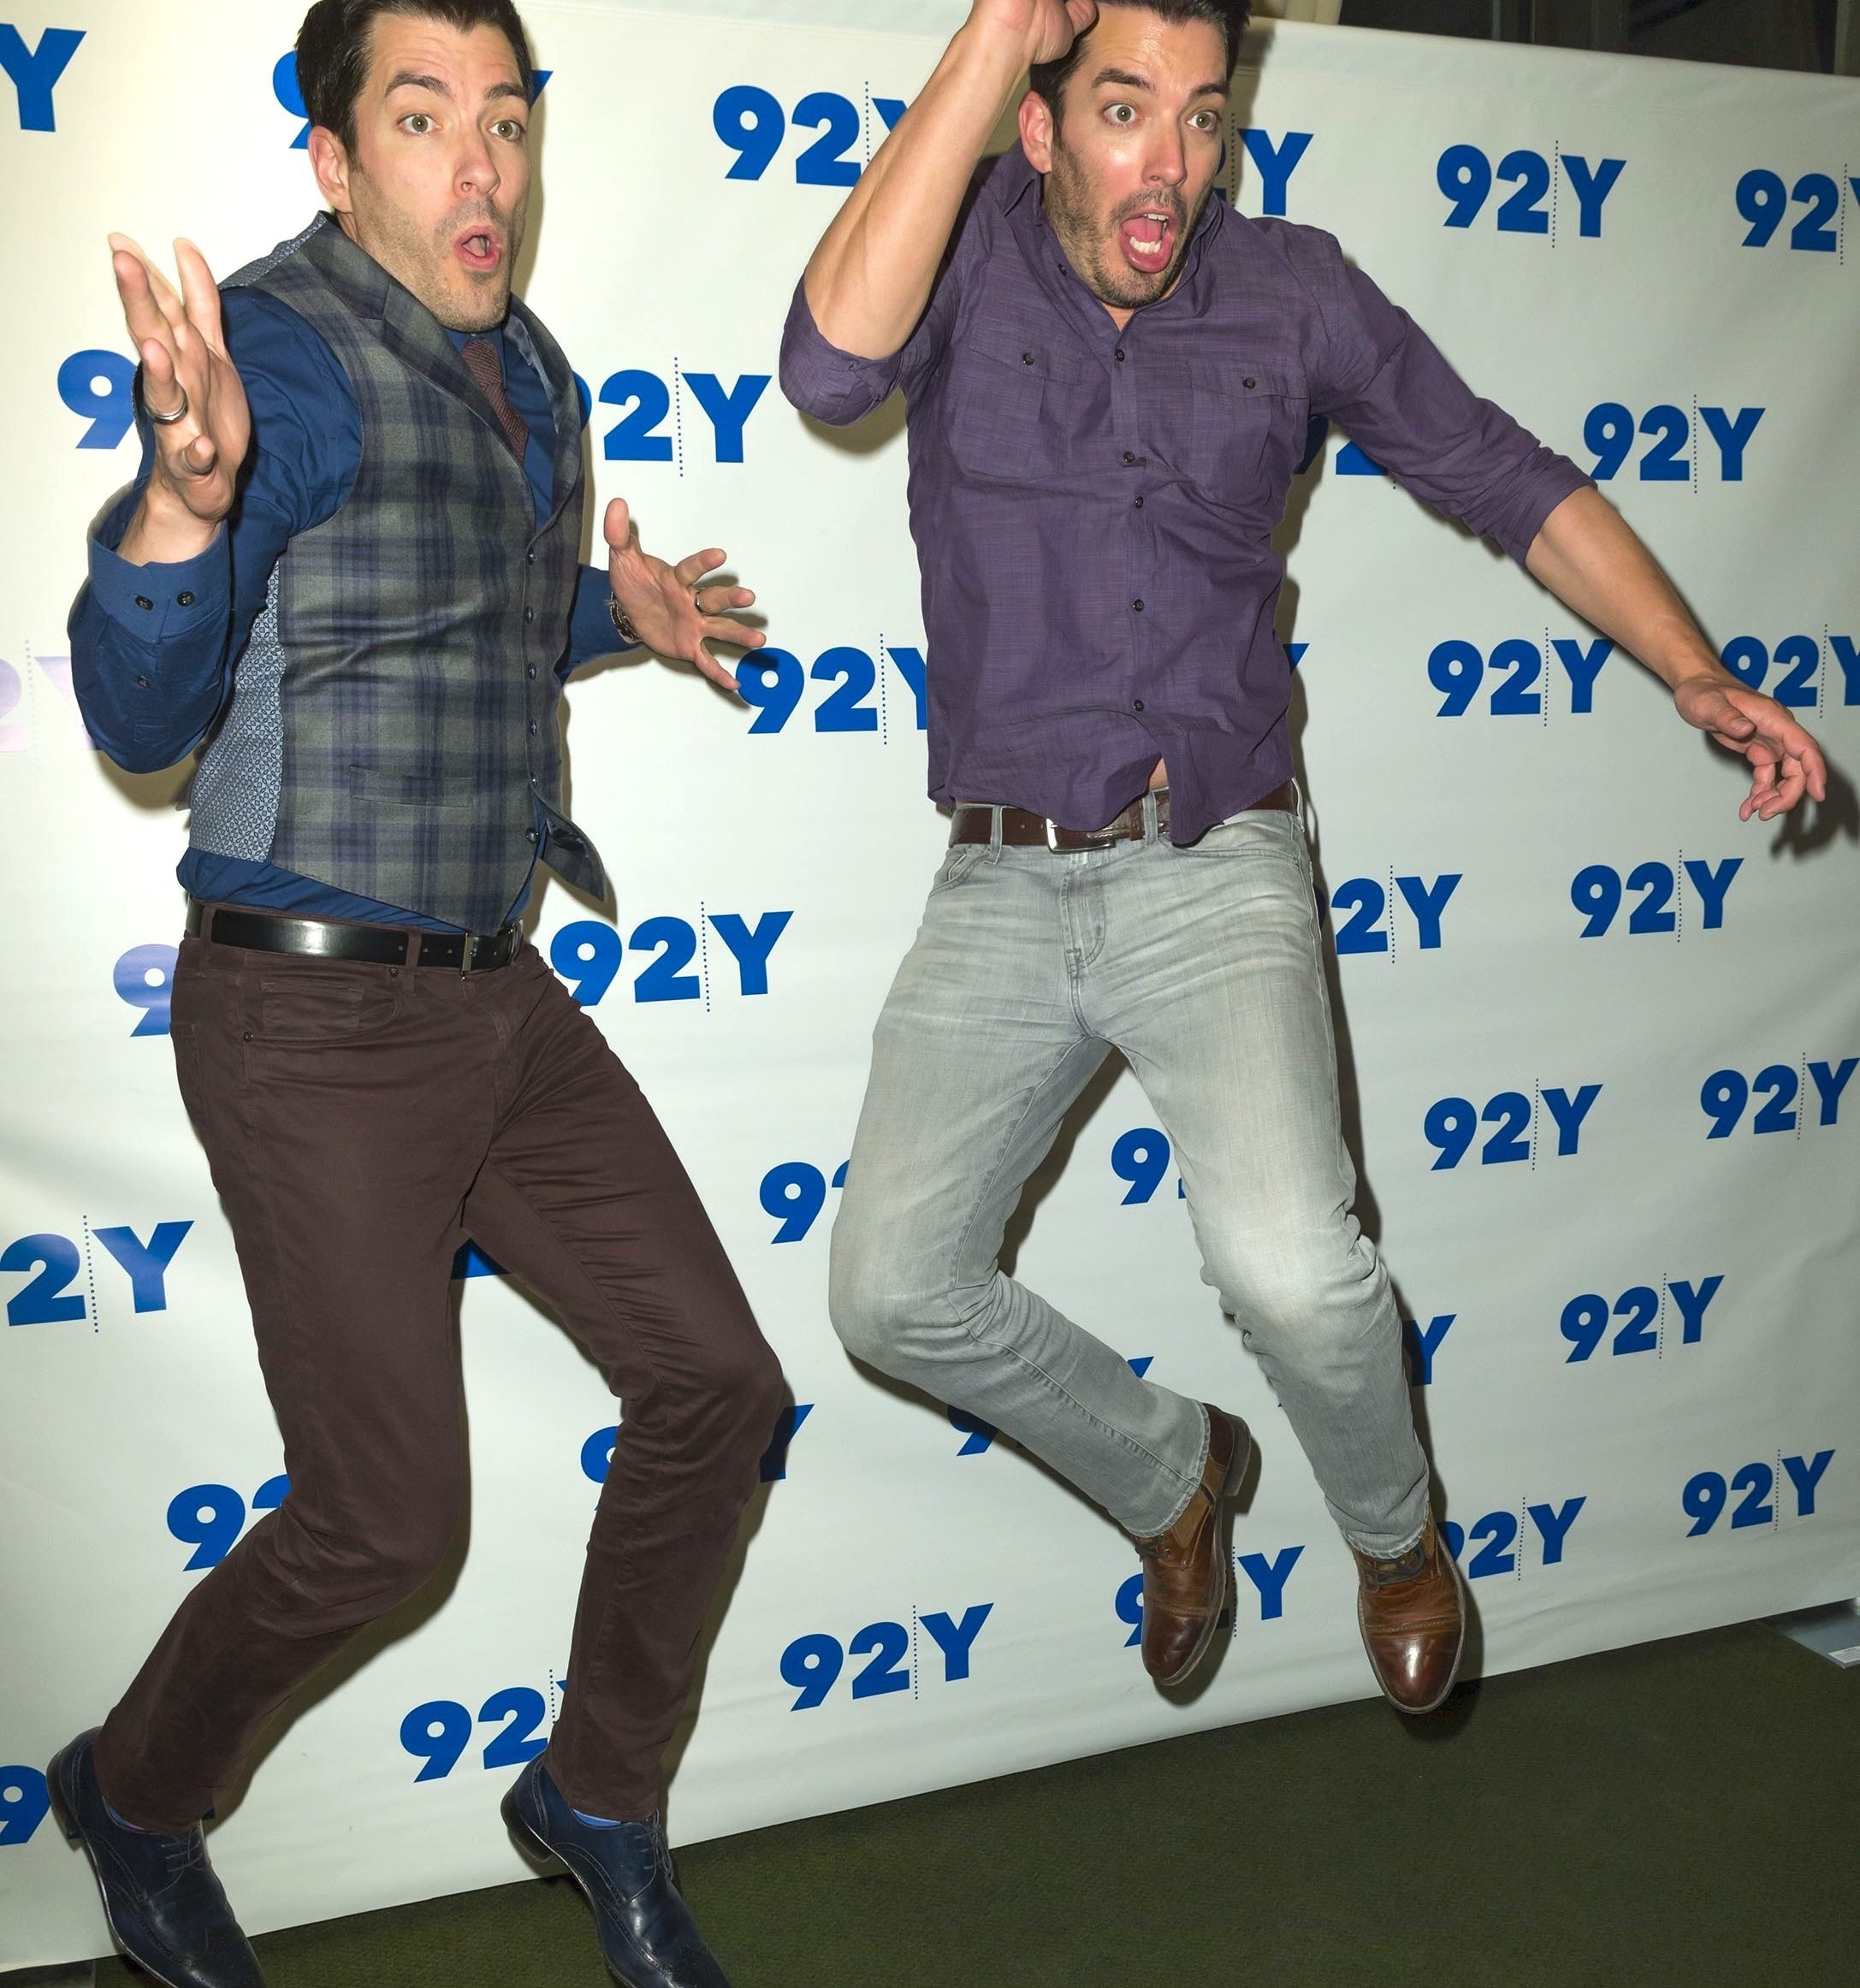 the property brother mid-jump